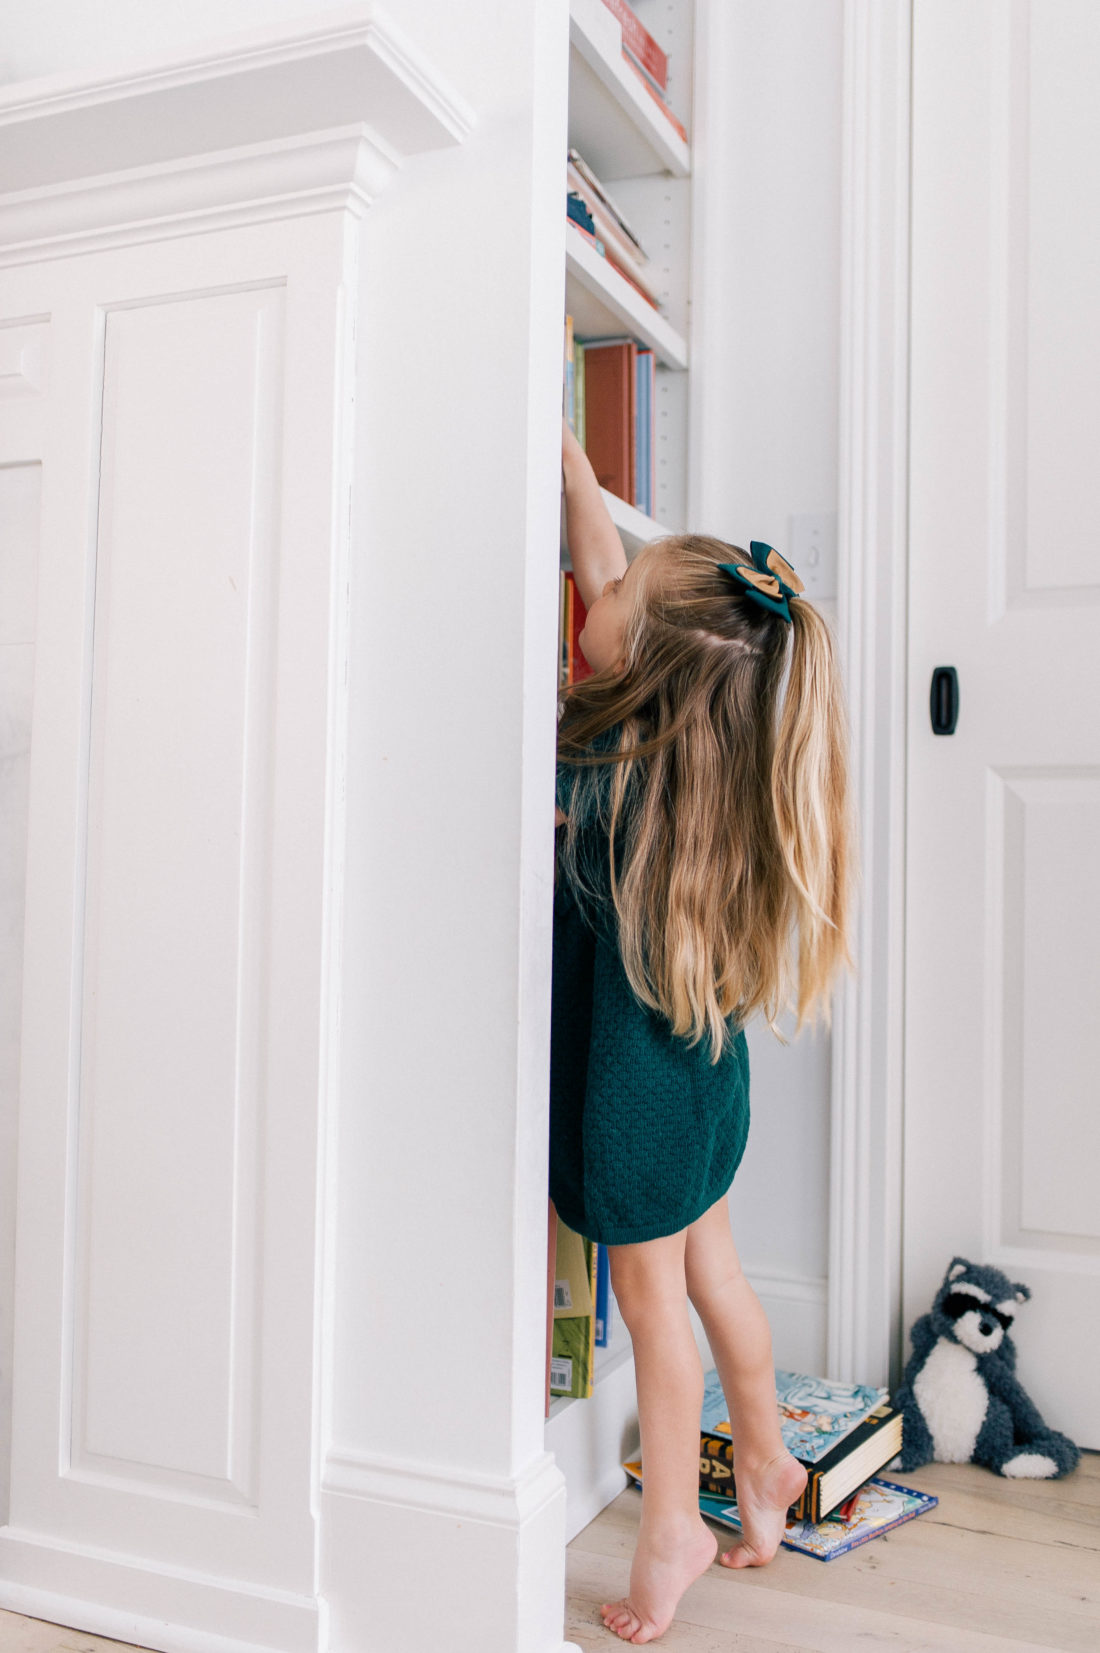 Marlowe Martino wears a hunter green dress and reaches up to pull a book from the book shelf at her home in Connecticut